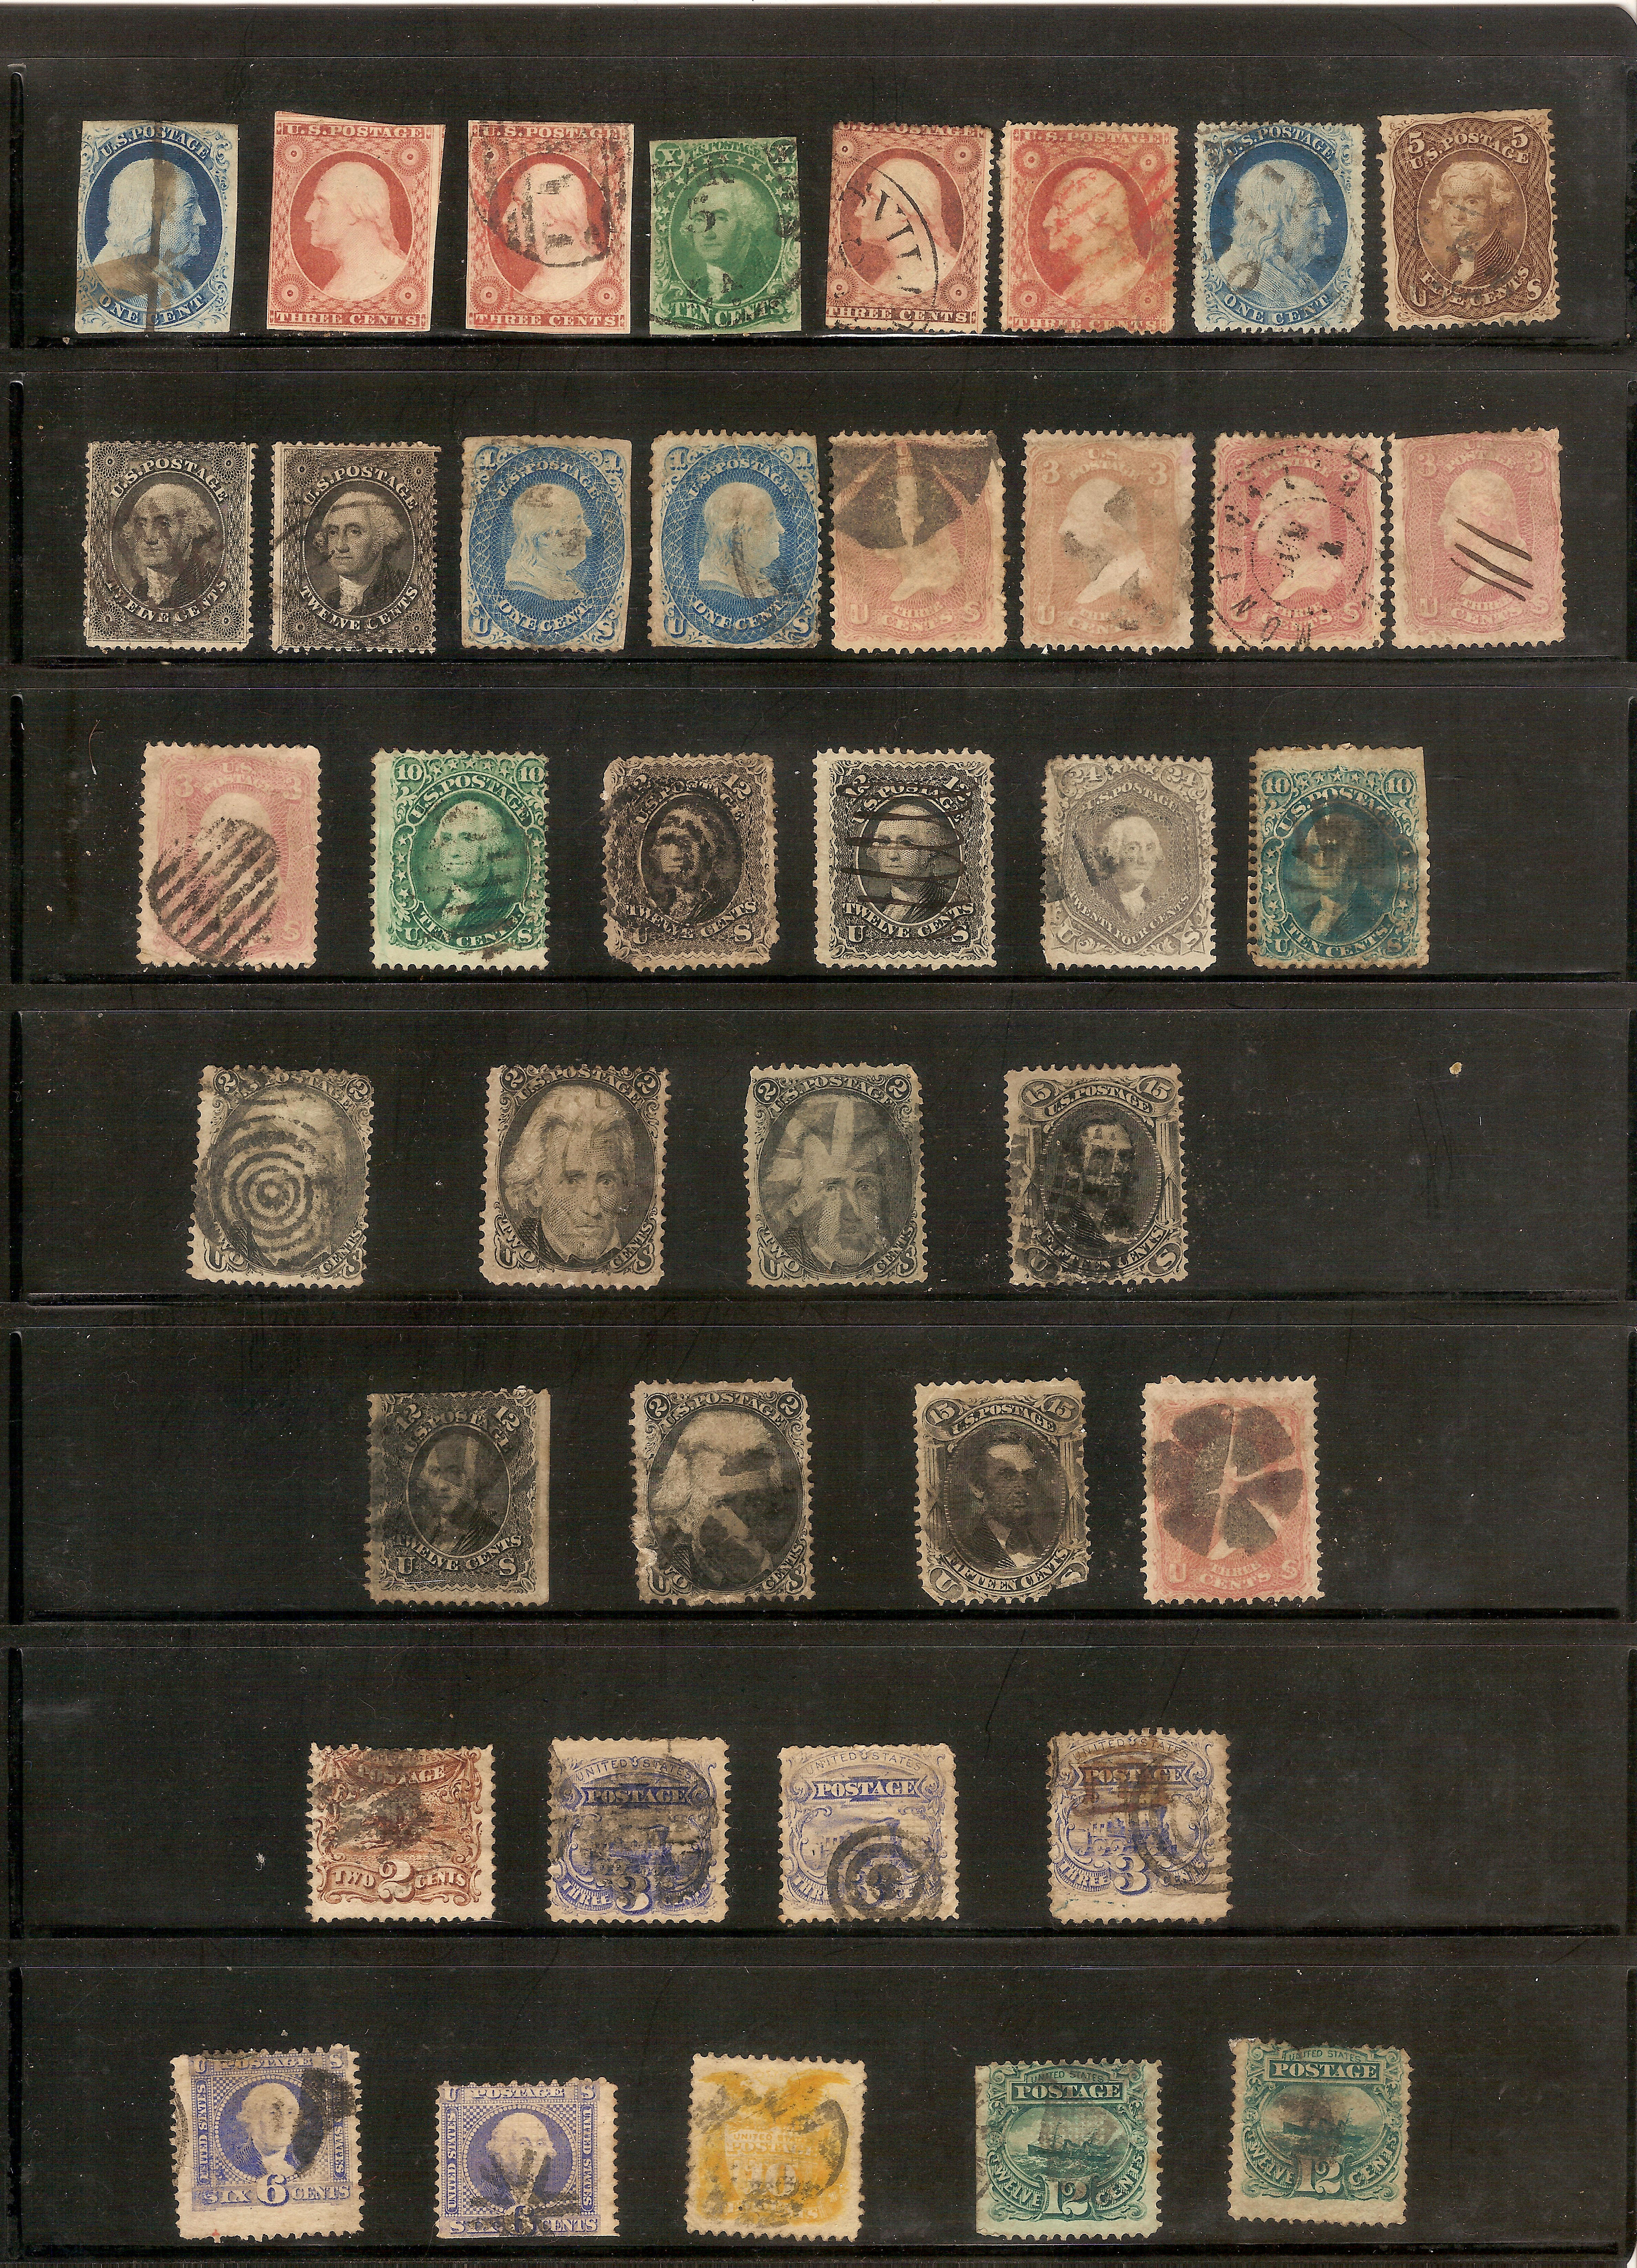 Stamps/cl1a.jpg